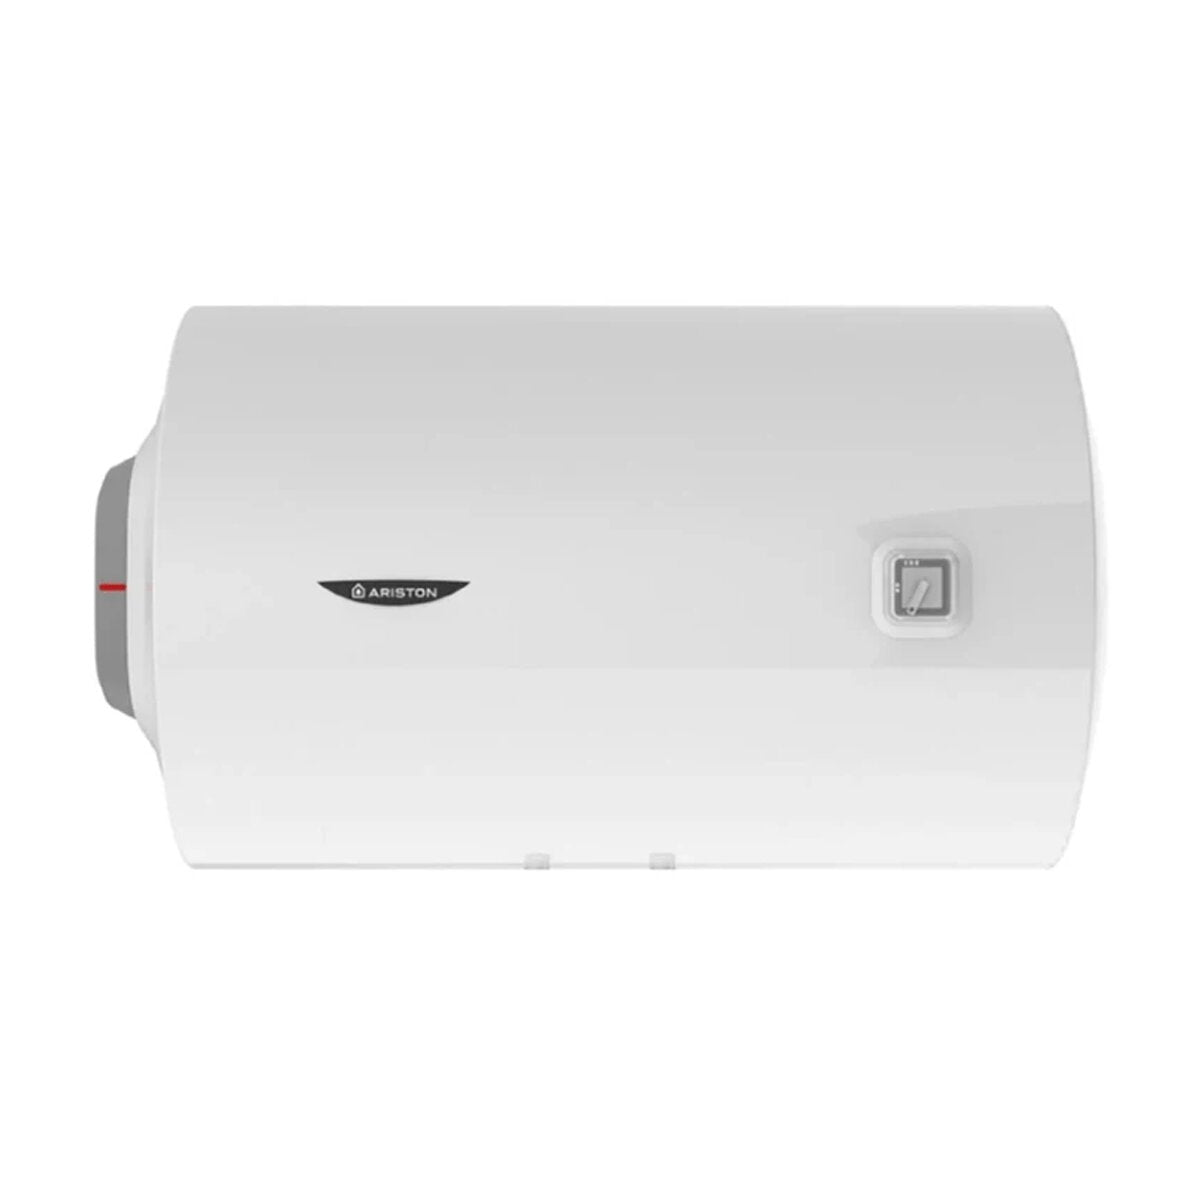 Ariston Pro1 R Horizontal Electric Water Heater 80 litres